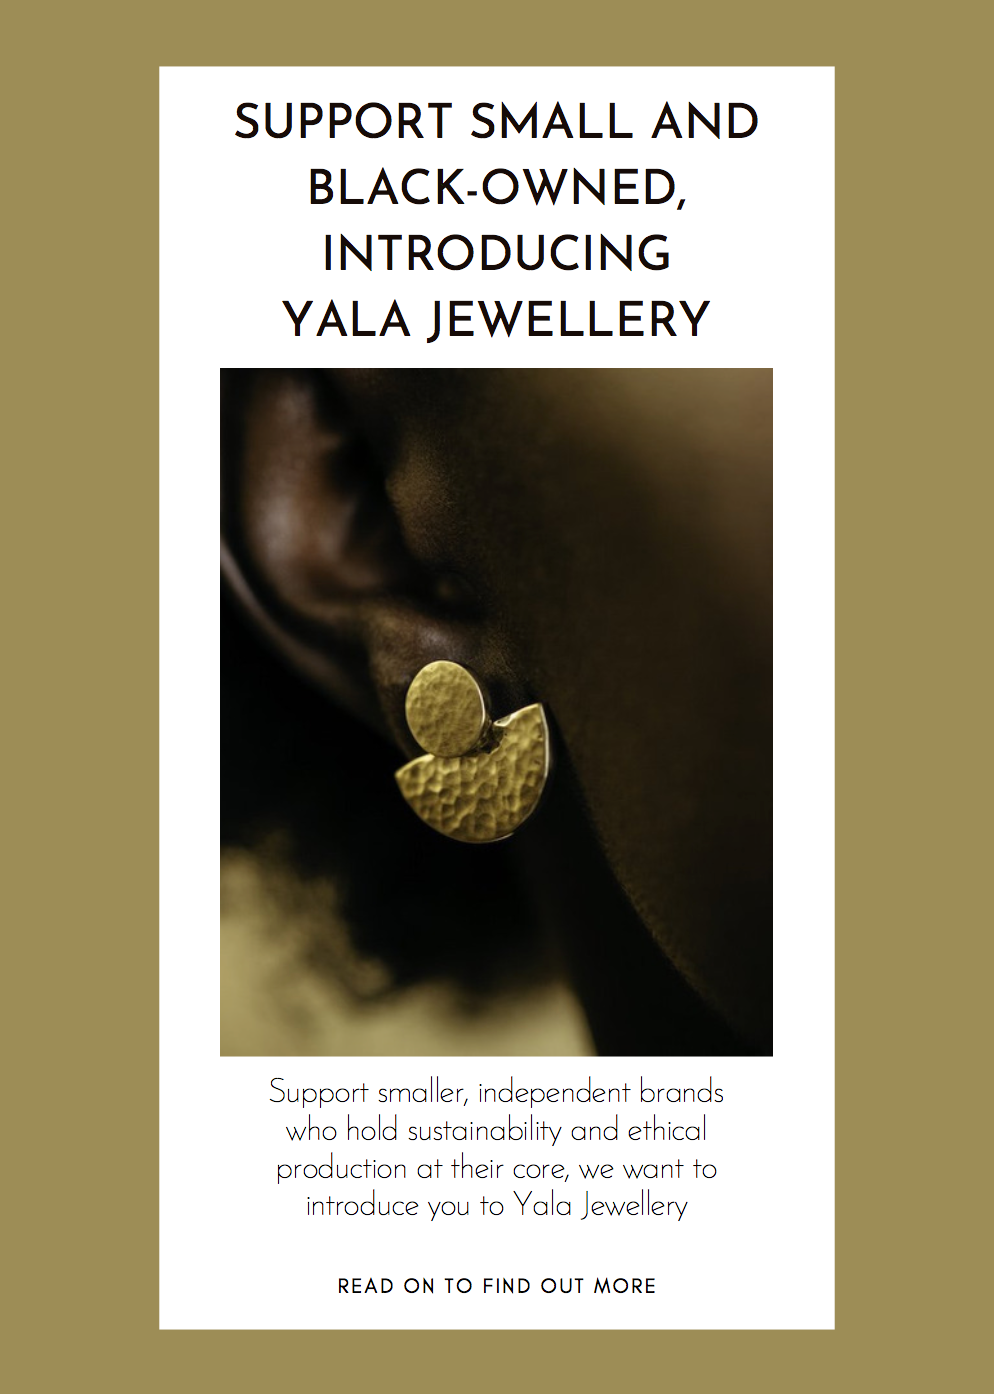 Support small and black-owned, introducing Yala Jewellery